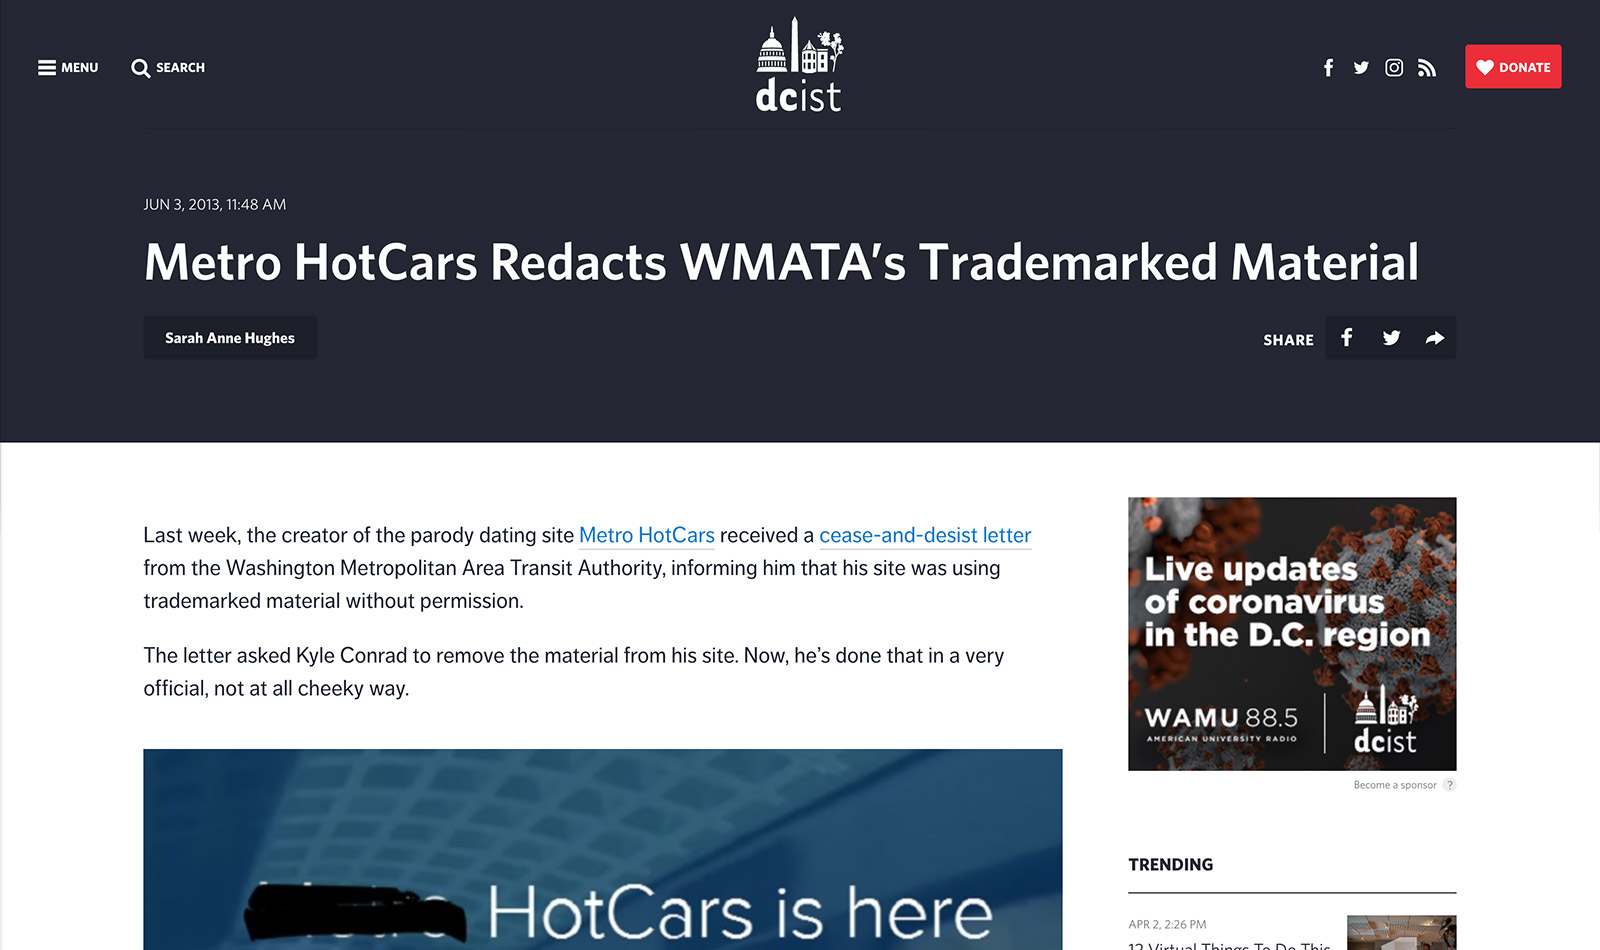 DCist coverage of the Metro HotCars site: "Metro HotCars Redacts WMATA's Trademarked Material"